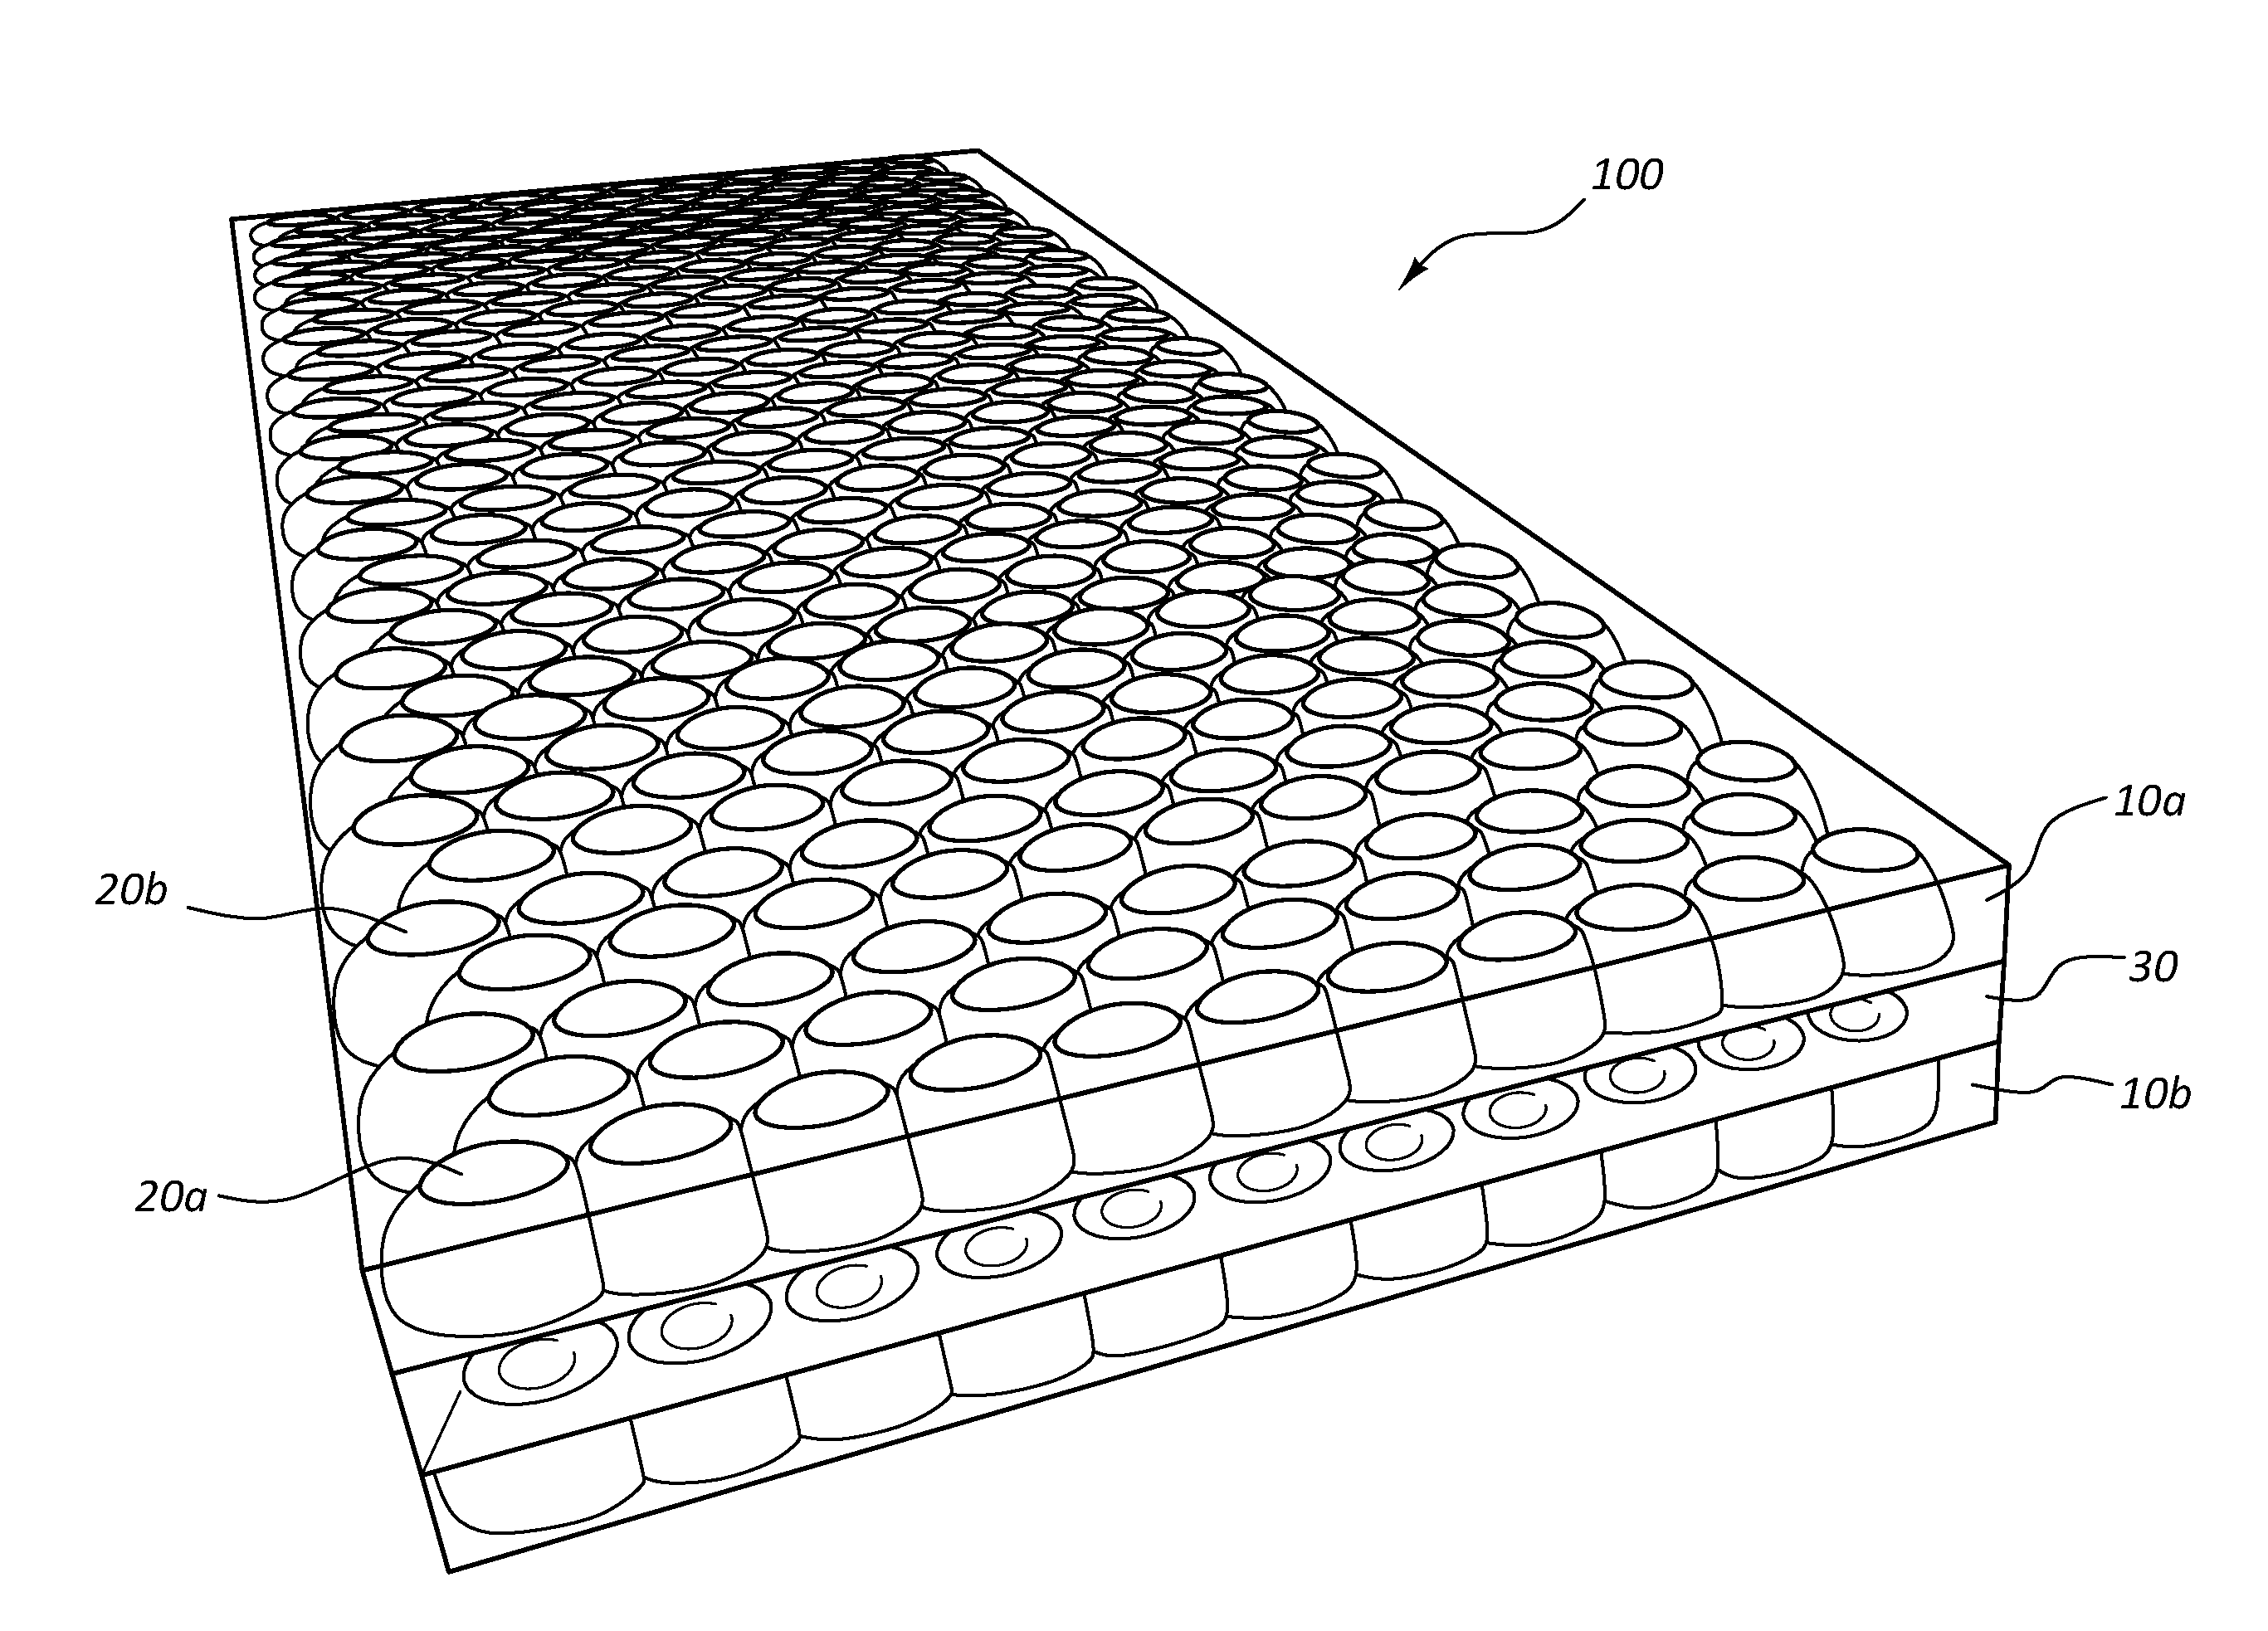 Multilayered Phantom Tissue Test Structure and Fabrication Process